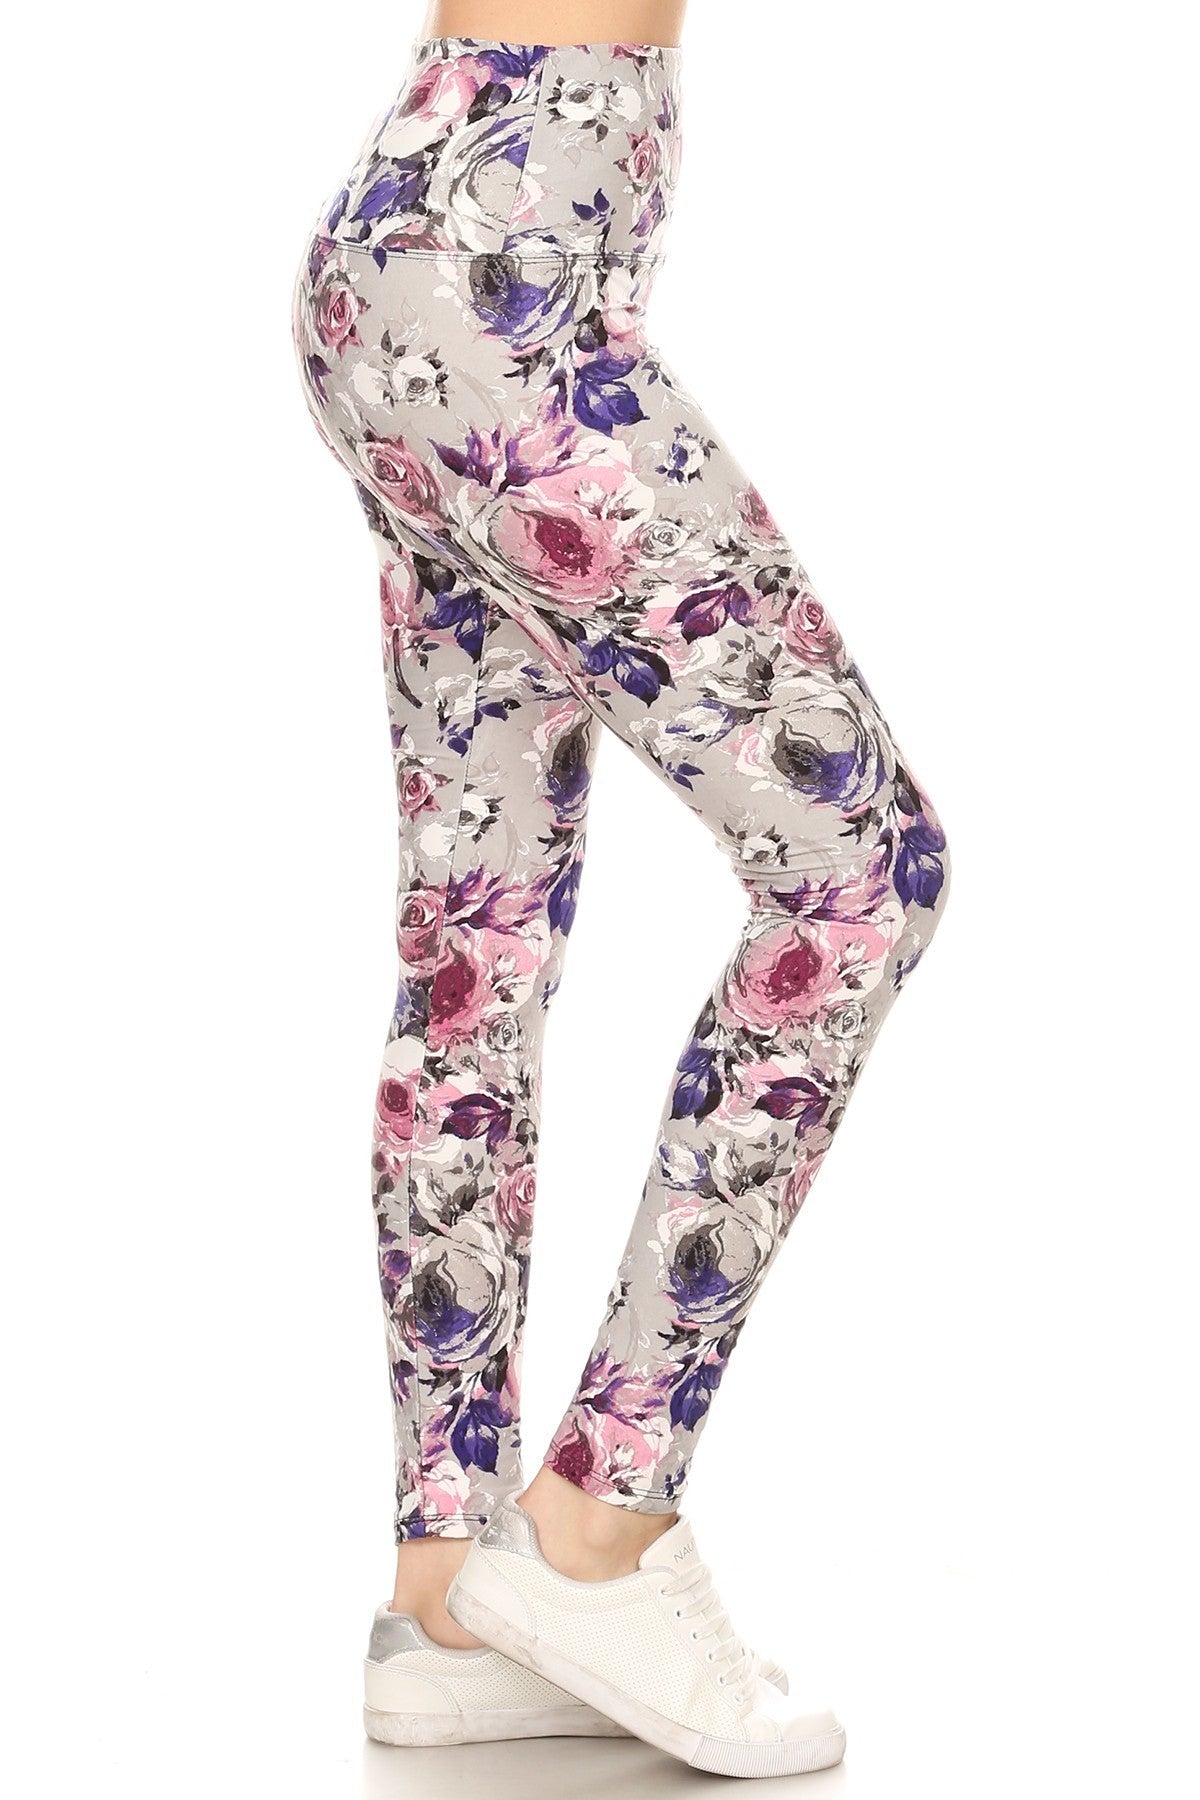 5-inch Long Yoga Style Banded Lined Floral Printed Knit Legging With High Waist Smile Sparker